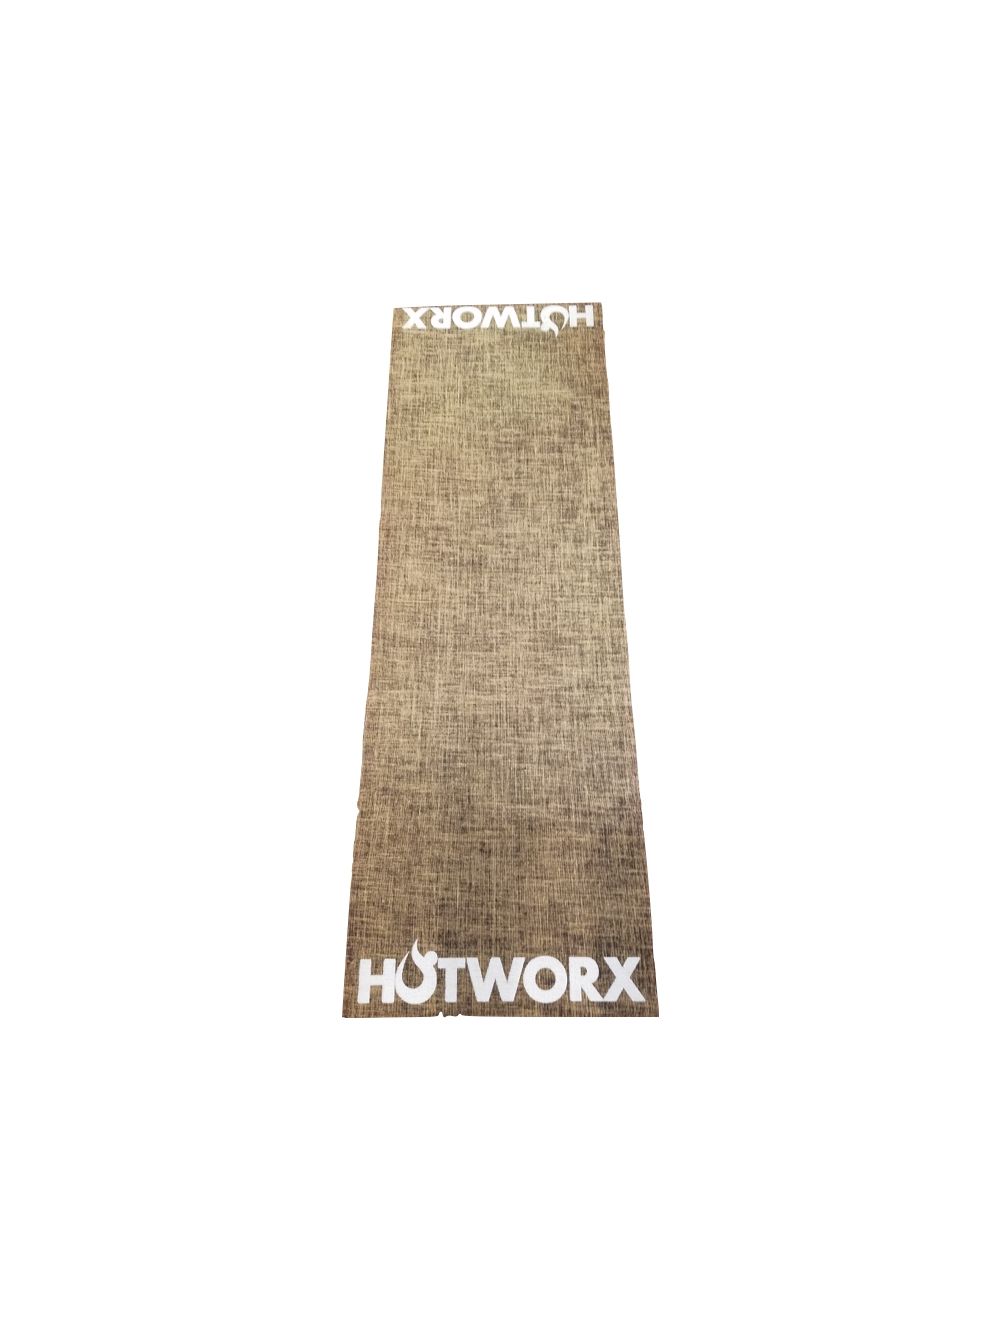 hotworx, Other, Hotworx Towel And Backpack